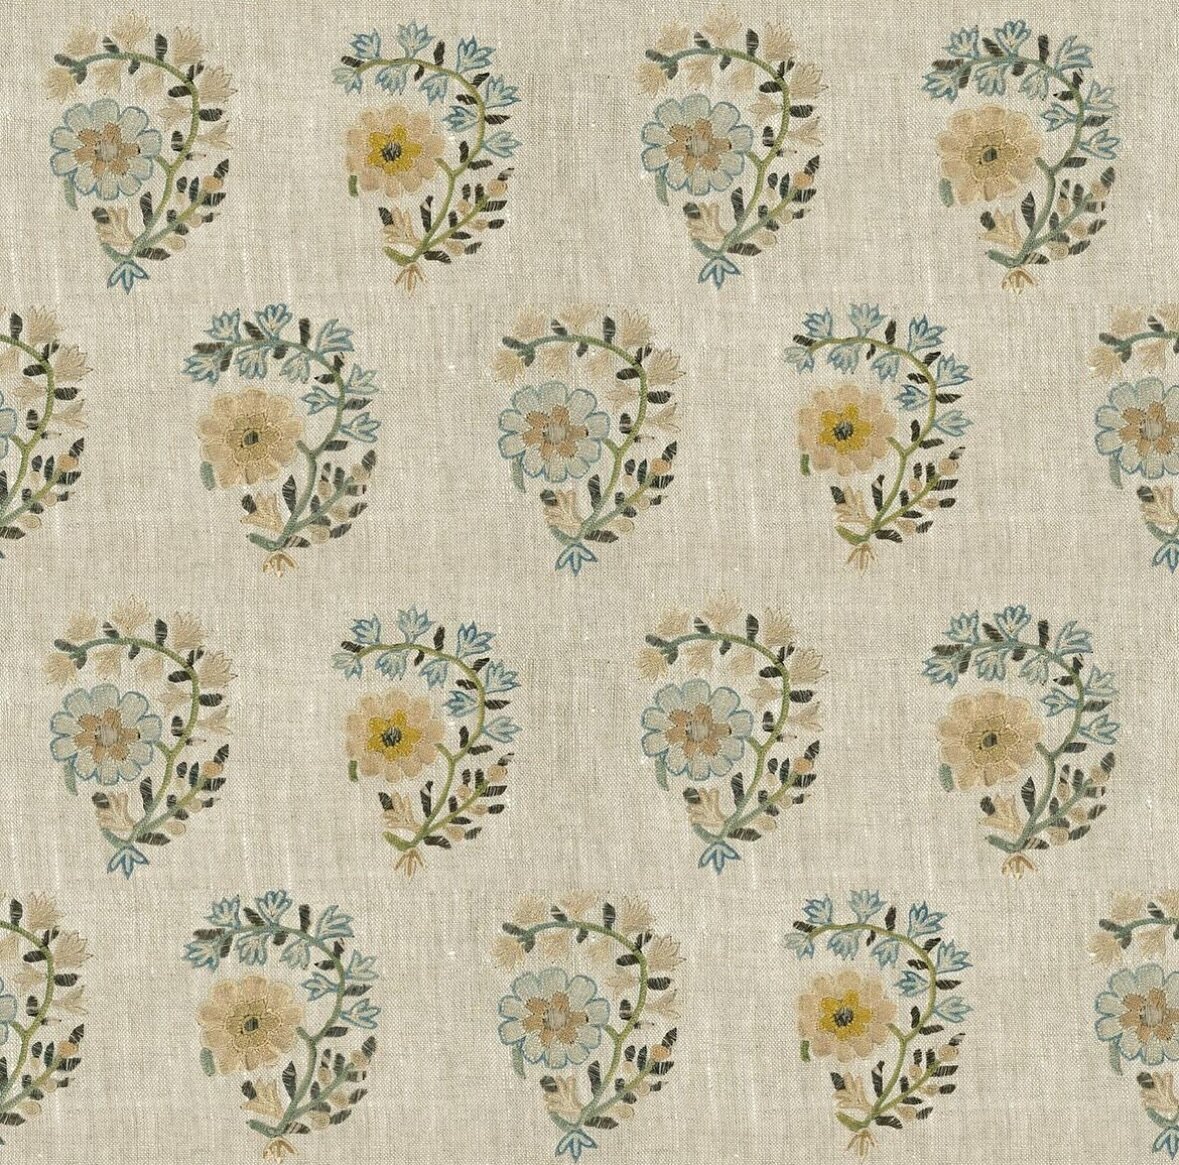 &ldquo;Daphne,&rdquo; drawing inspiration from Greek laurel wreaths and flowers, features exquisite chain stitch embroidery on linen in a palette of green, blue, ivory, and yellow. 

This special addition to the collection will be making its way to s